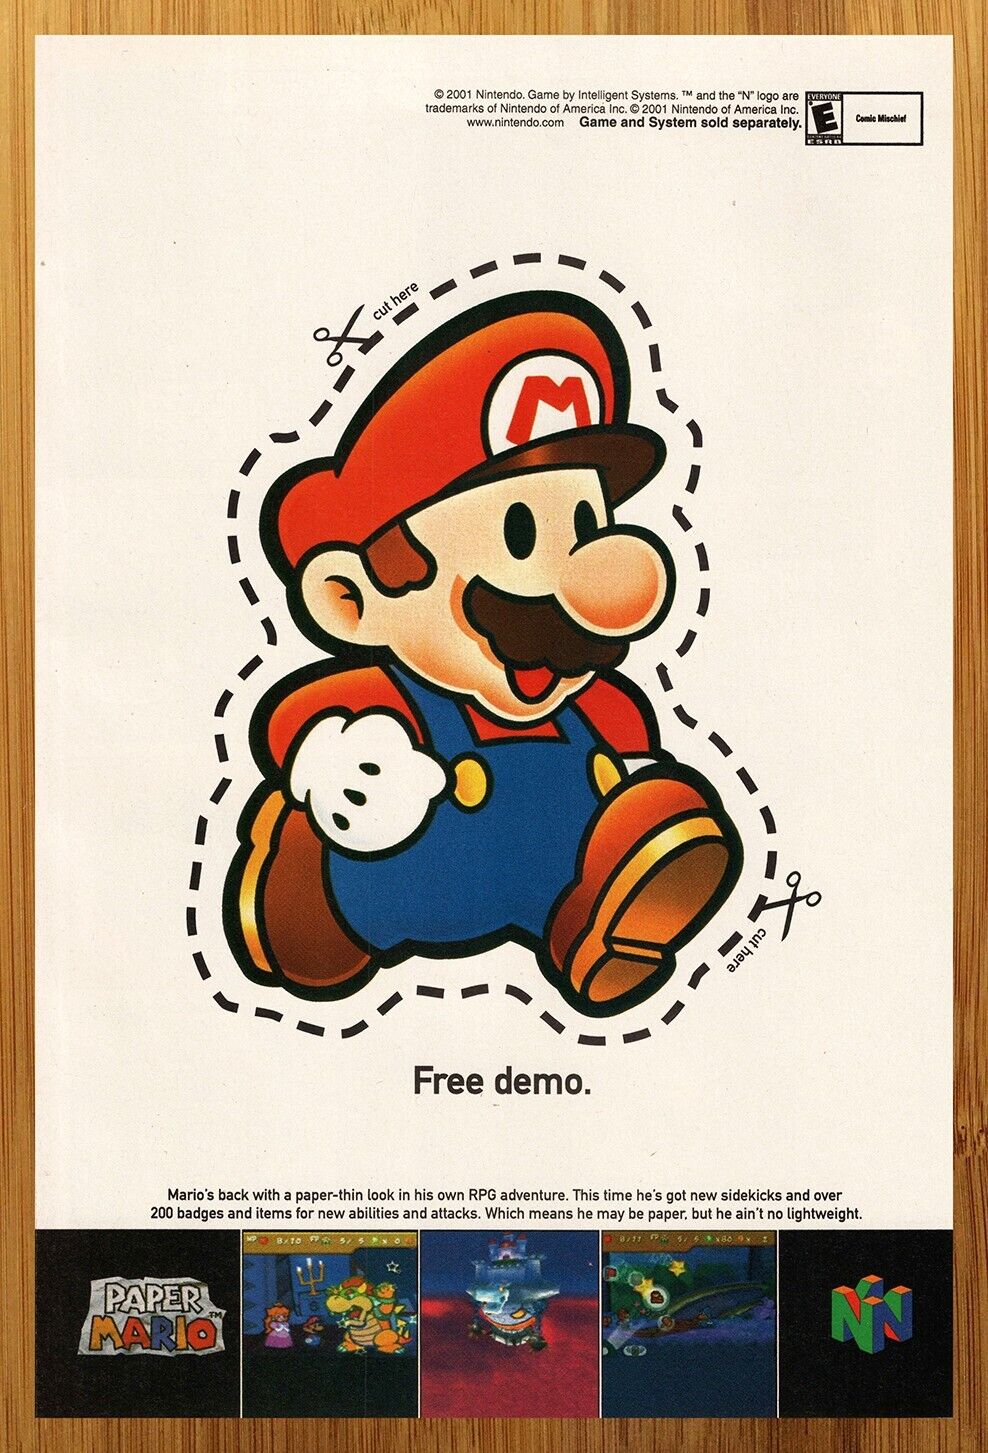 2001 Paper Mario N64 Nintendo 64 Print Ad/Poster Official Video Game Promo Art